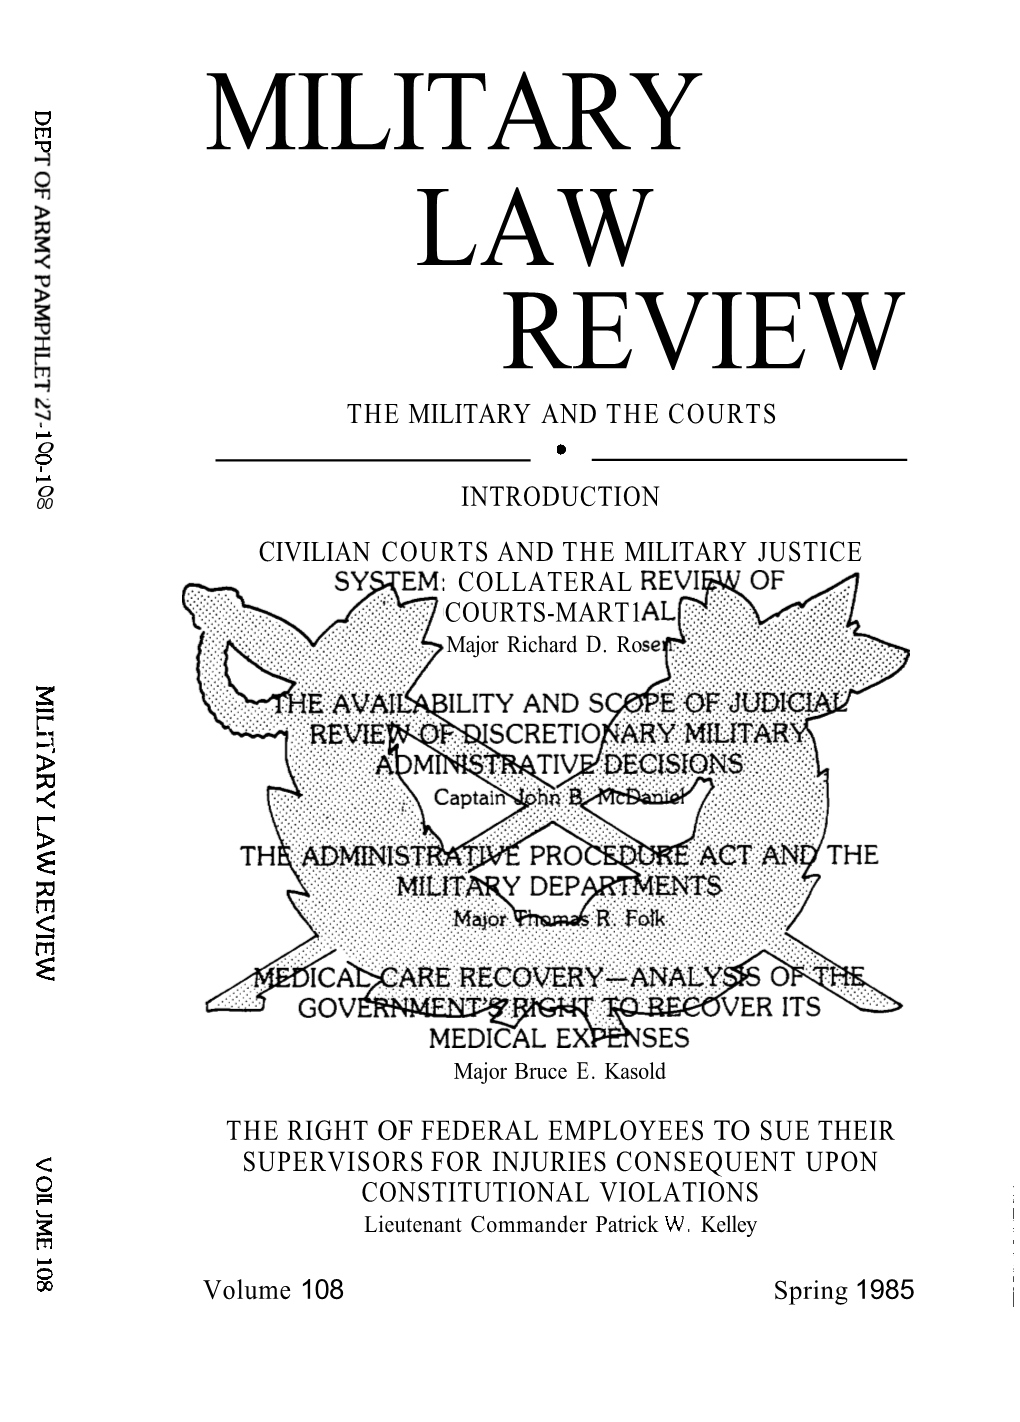 MILITARY LAW REVIEW the MILITARY and the COURTS R 0 0 0 W 0 00 INTRODUCTION CIVILIAN COURTS and the MILITARY JUSTICE : COLLATERAL COURTS-MART1 Major Richard D